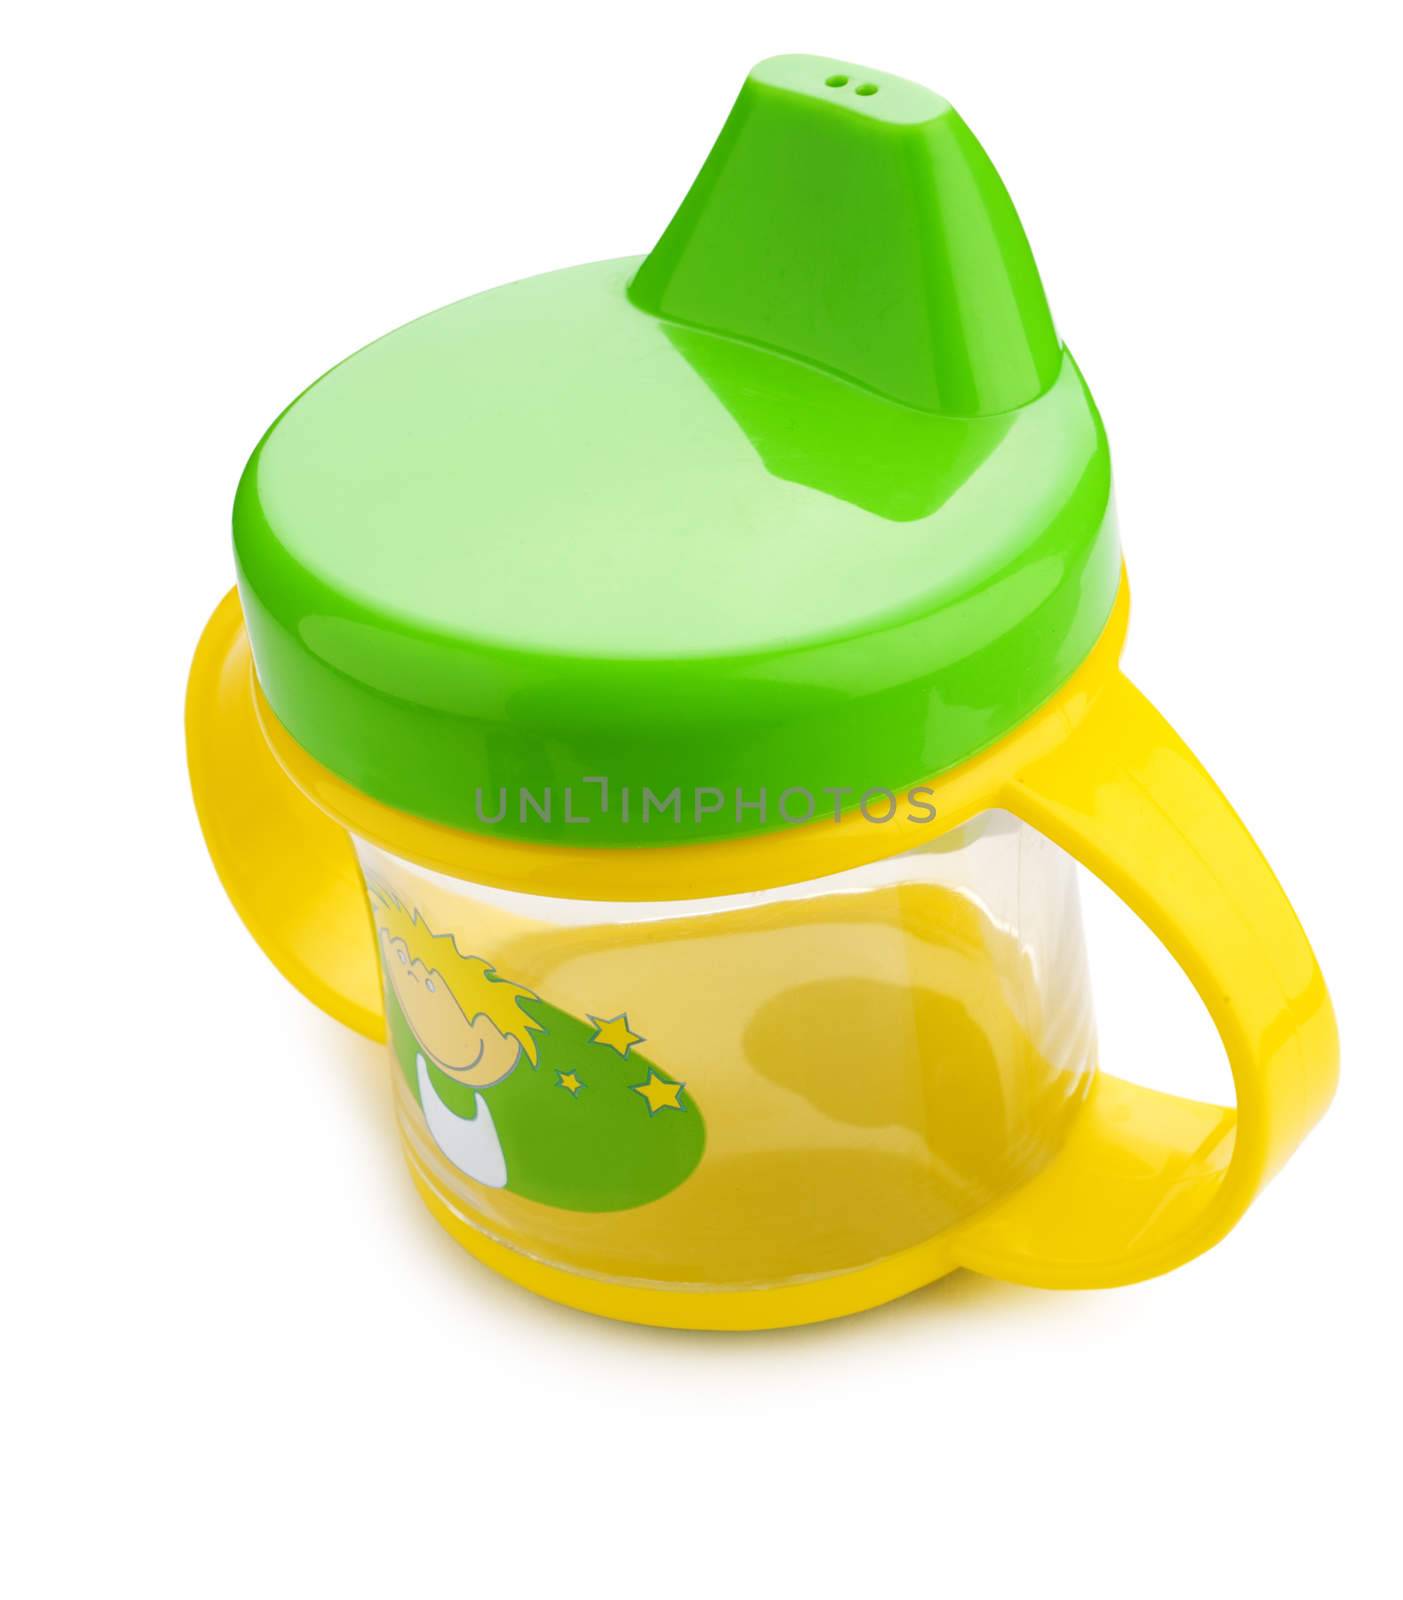 Children's bottle for drink by mihalec